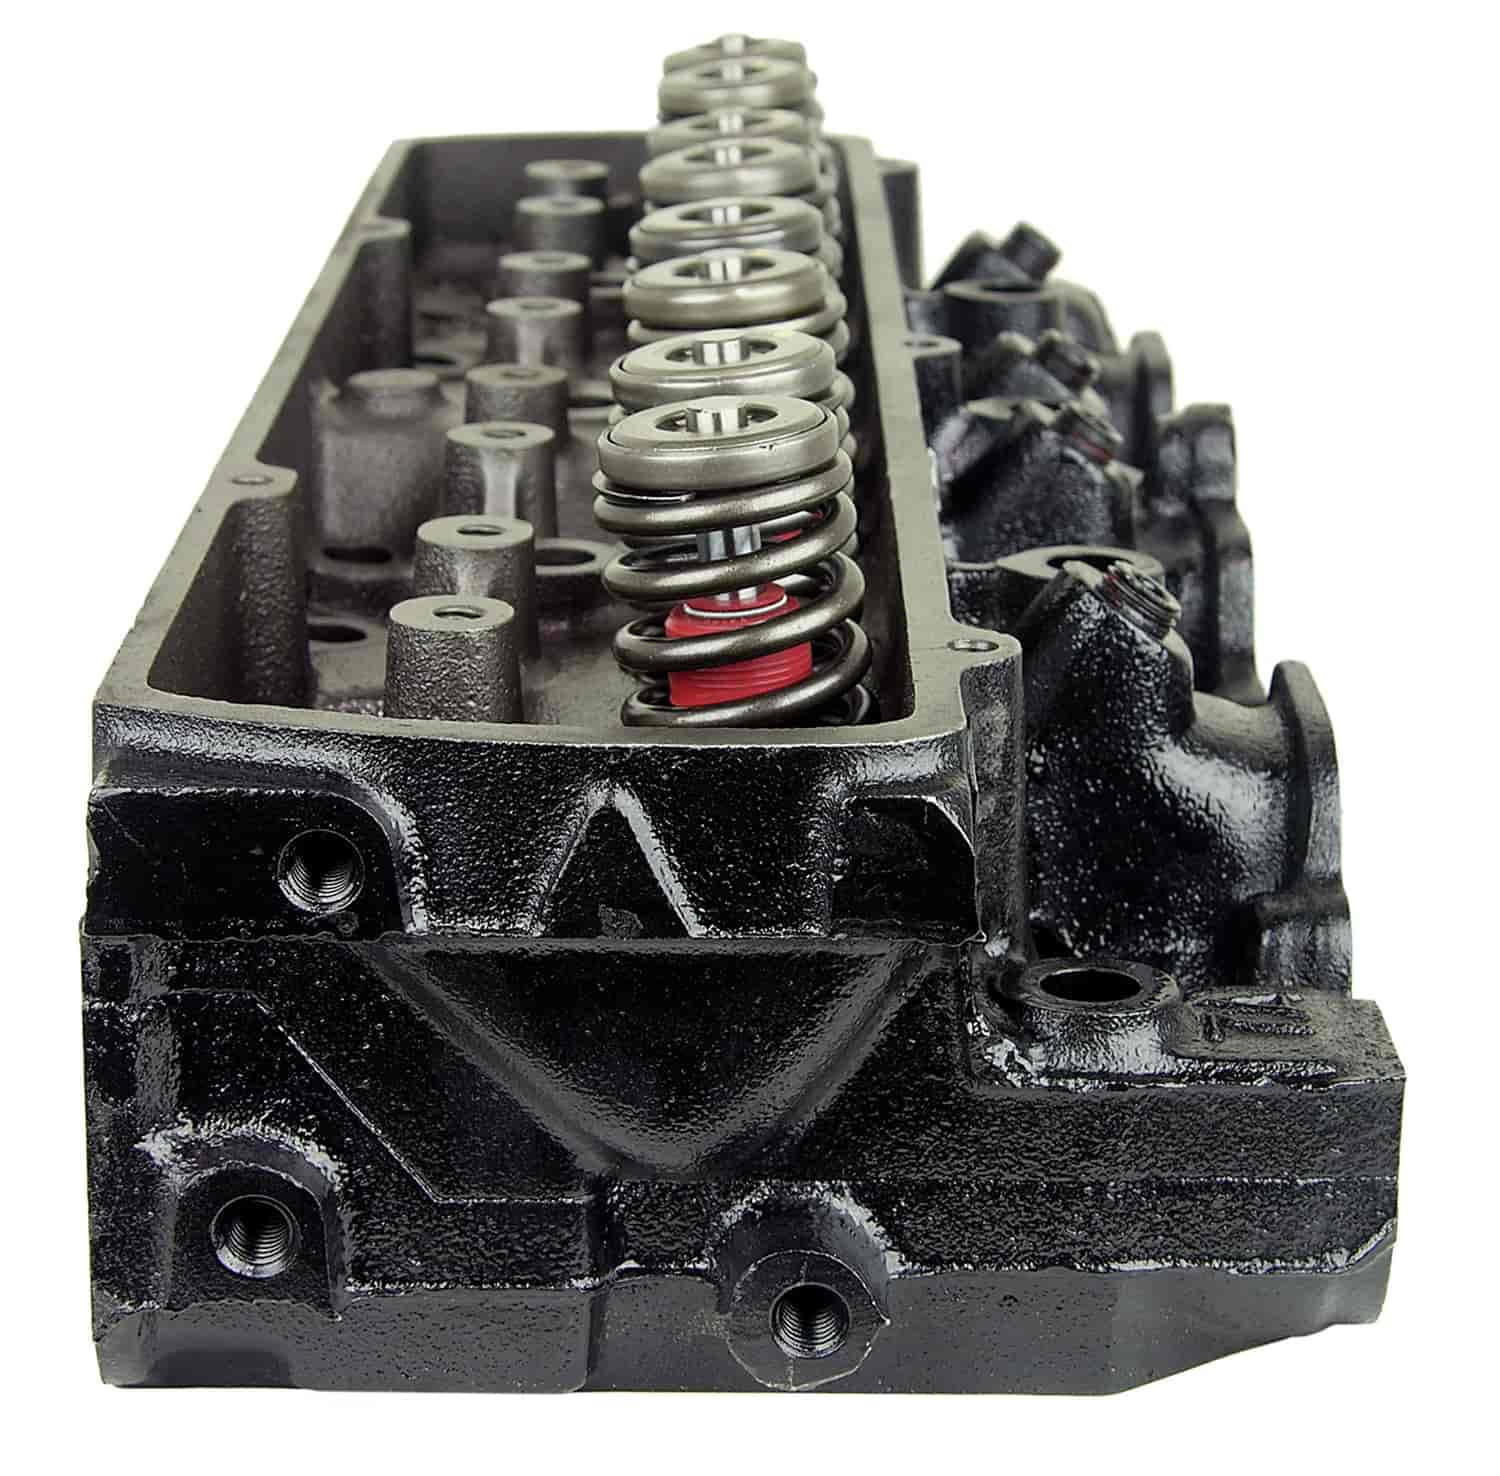 Remanufactured Cylinder Head for 1985-1990 Chevy, Cadillac, Buick, Oldsmobile, & Pontiac with 307ci/5.0L Olds V8